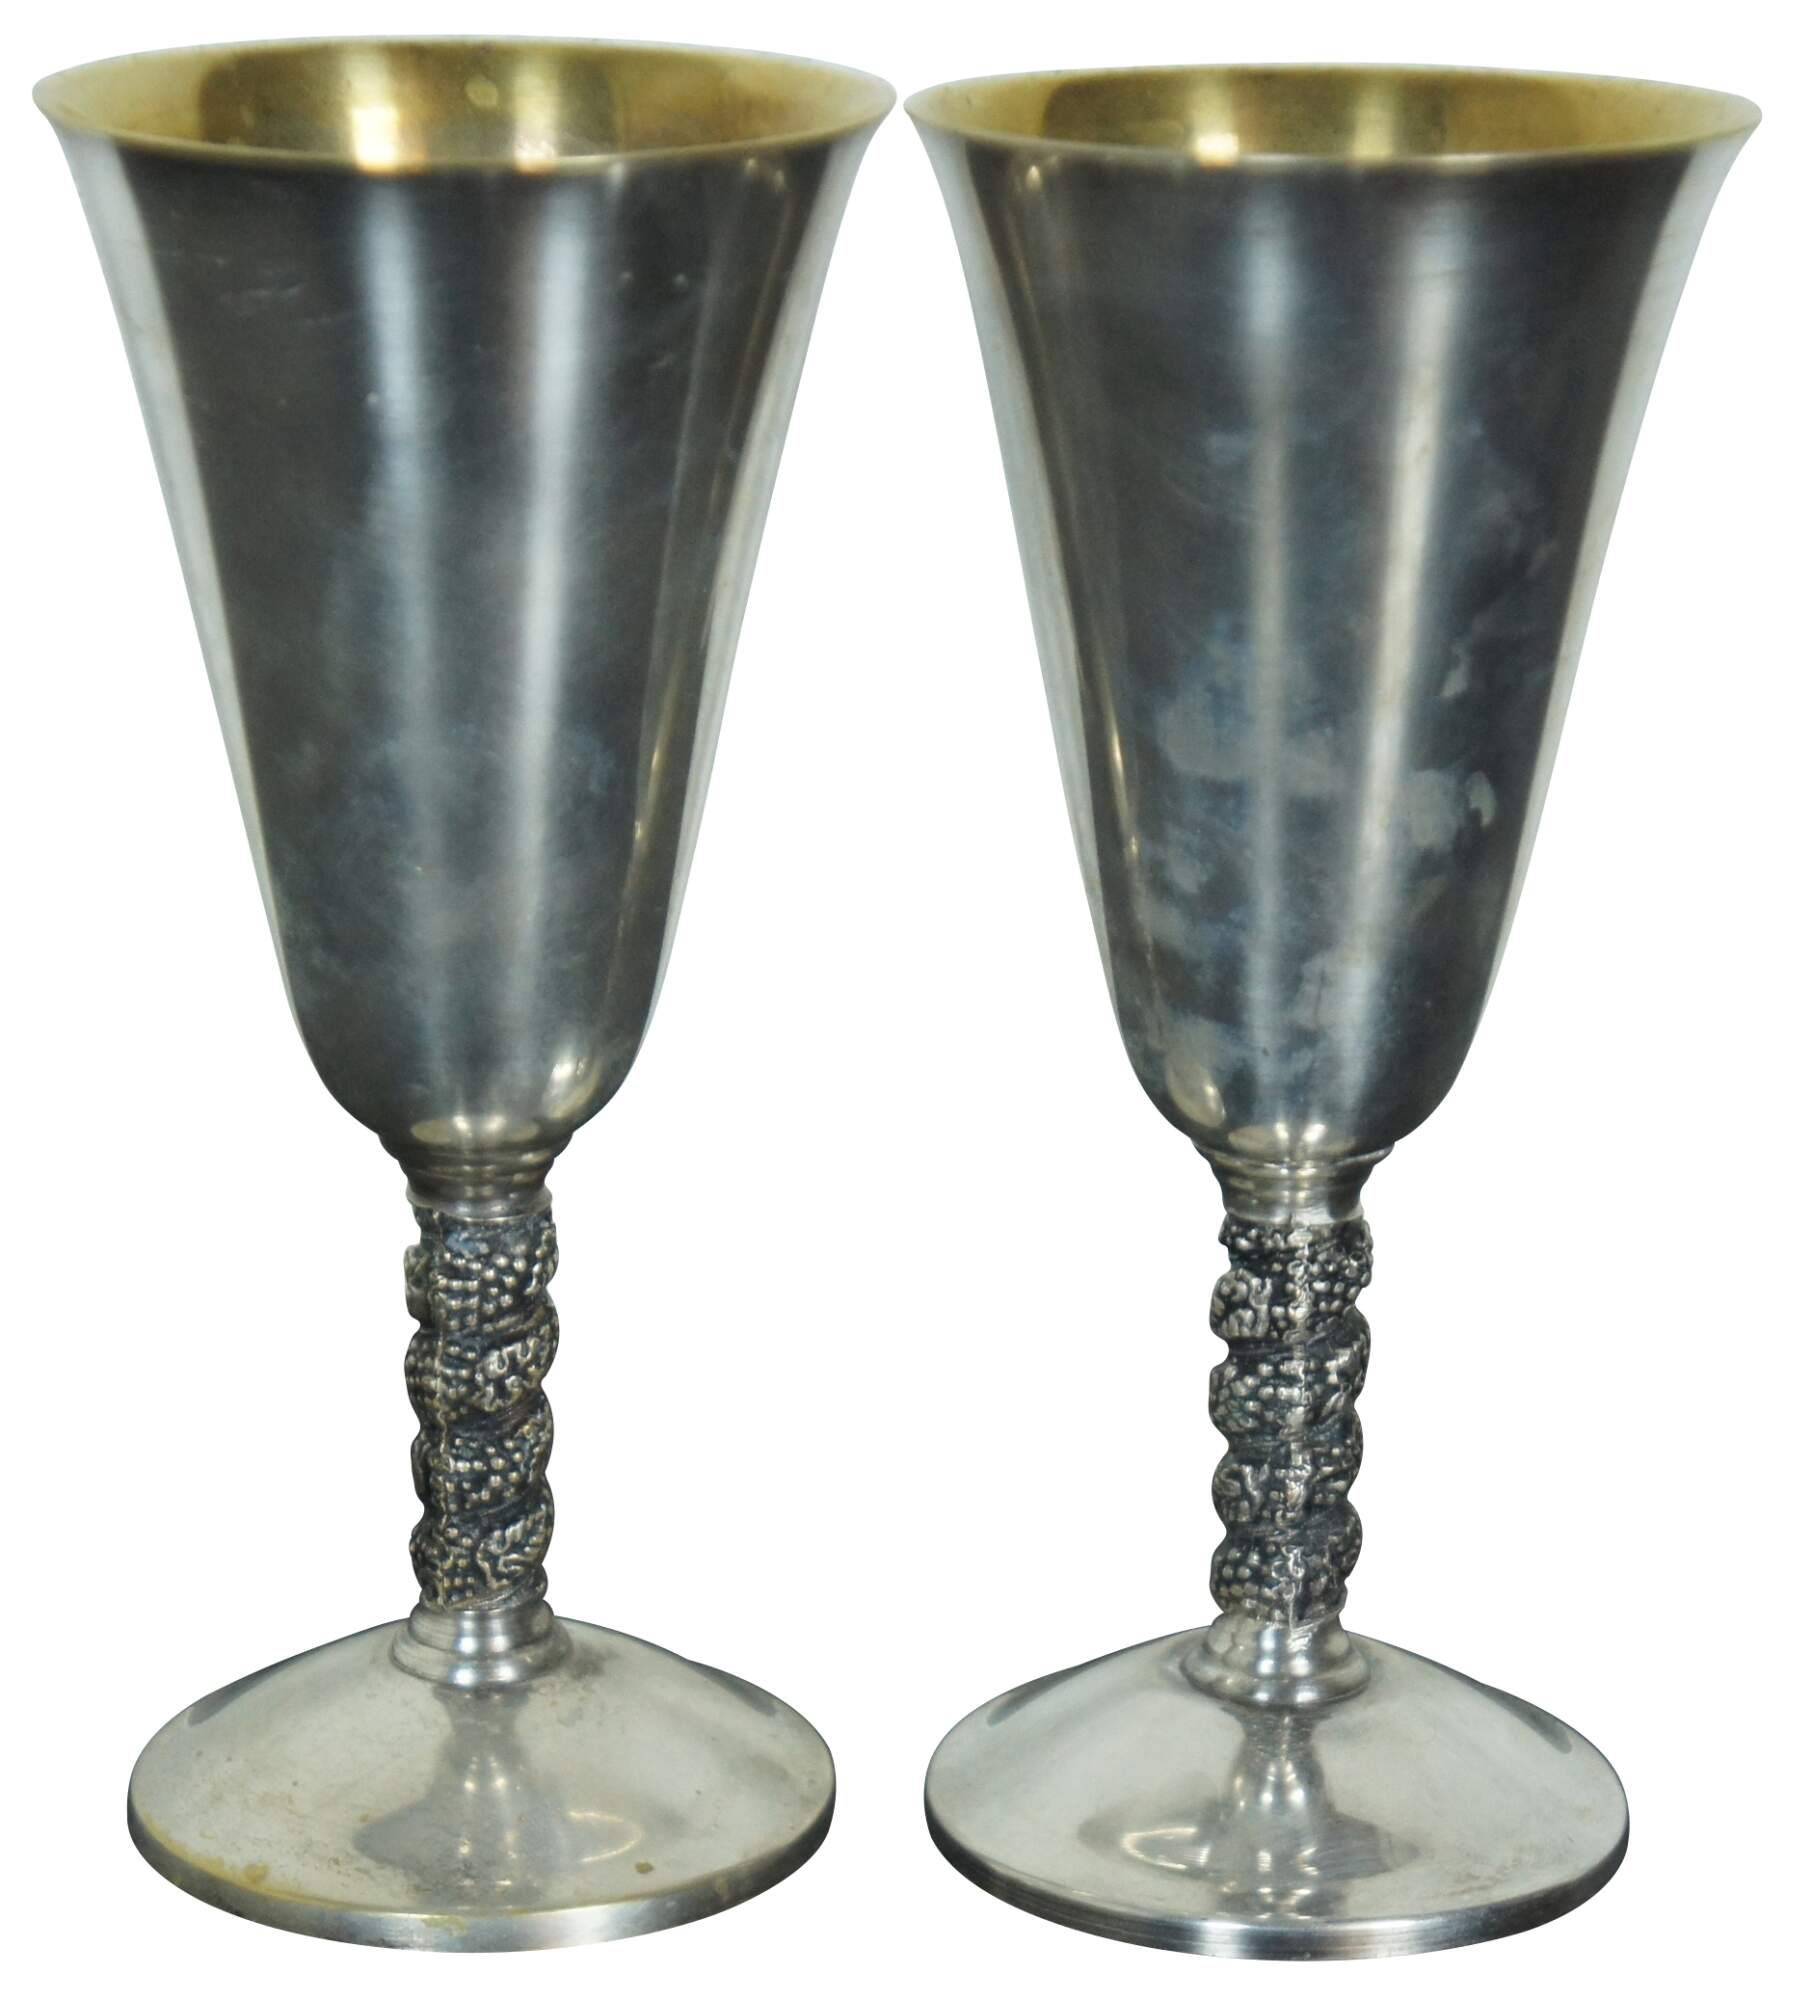 2 Vintage Spanish Roma SL Silver Plate Grapevine Wine Goblets Cups Spain 7